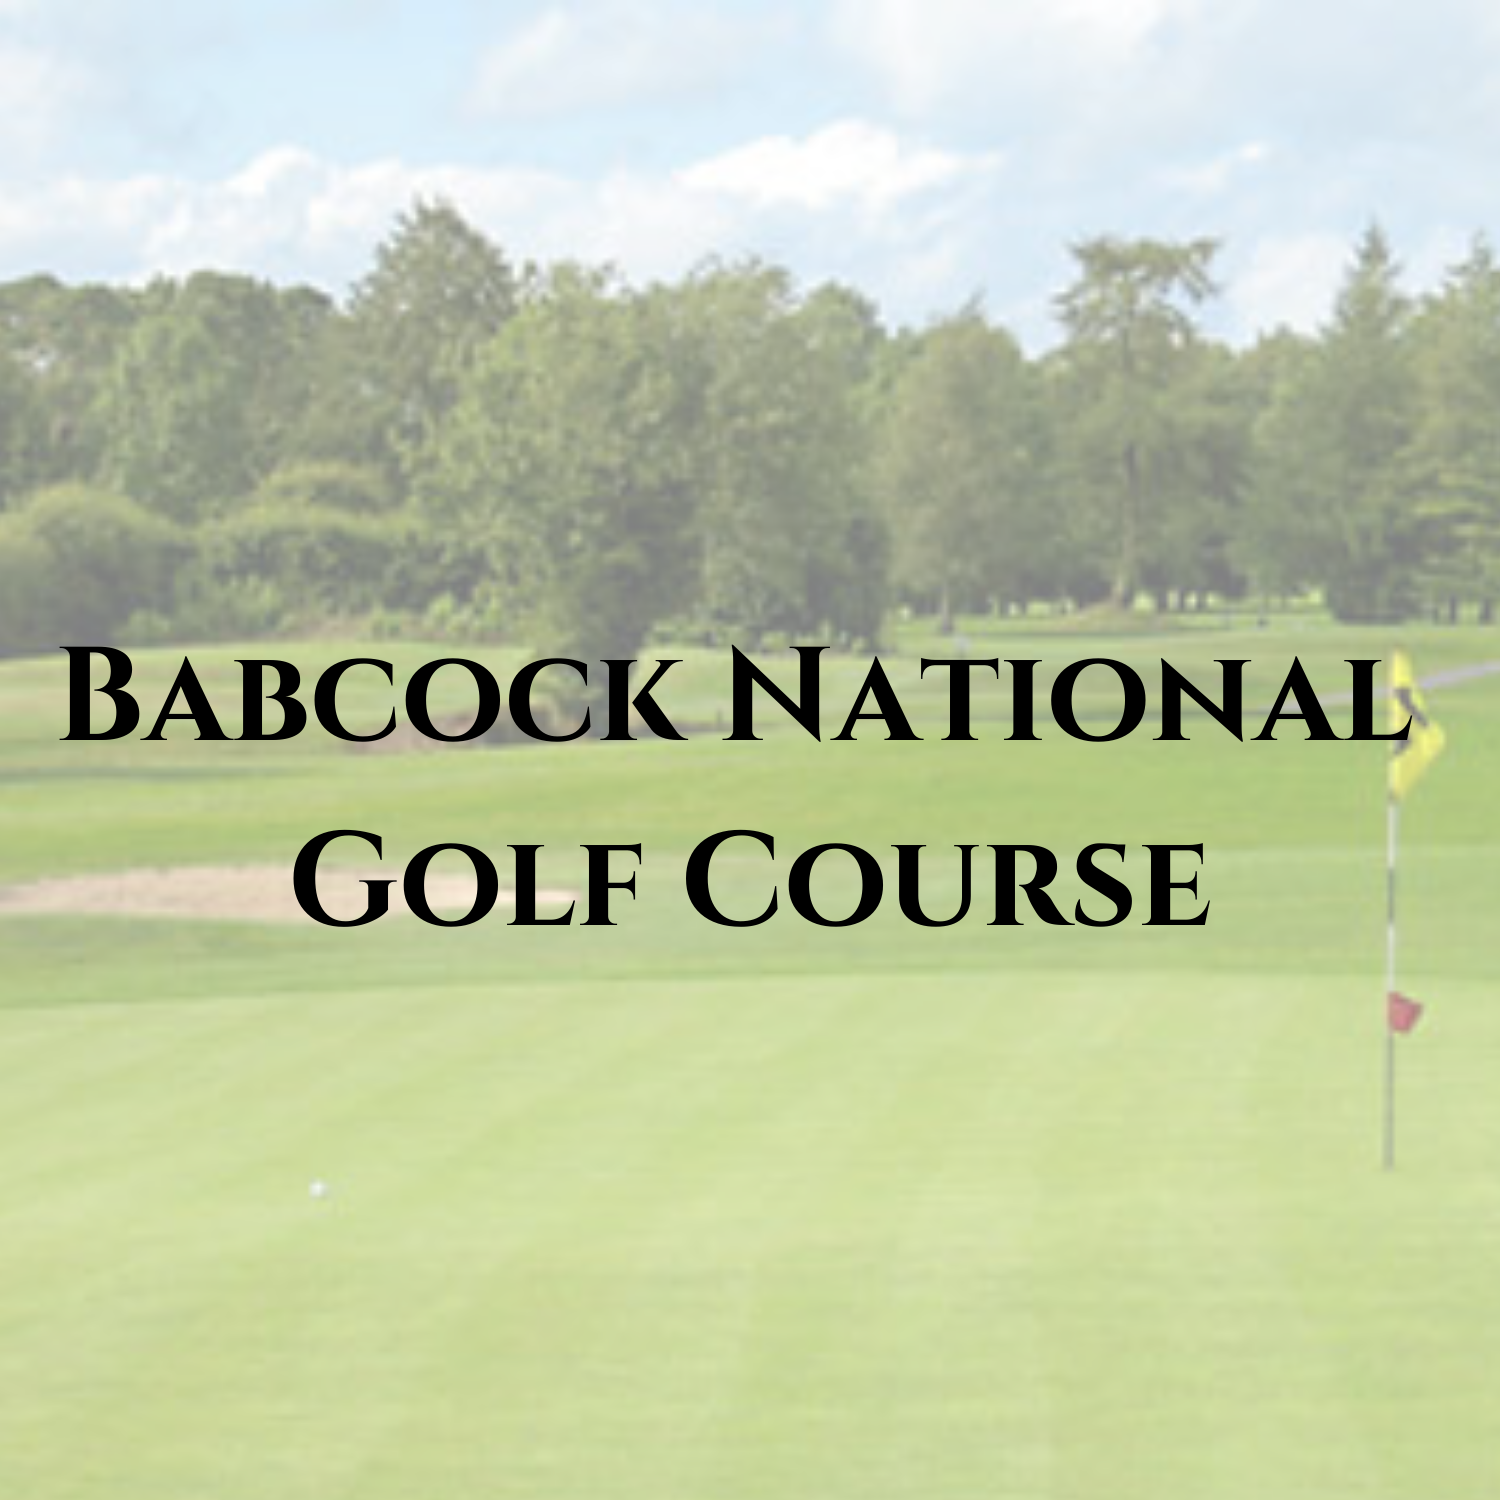 Babcock National Template 1x1 for golf course button.png